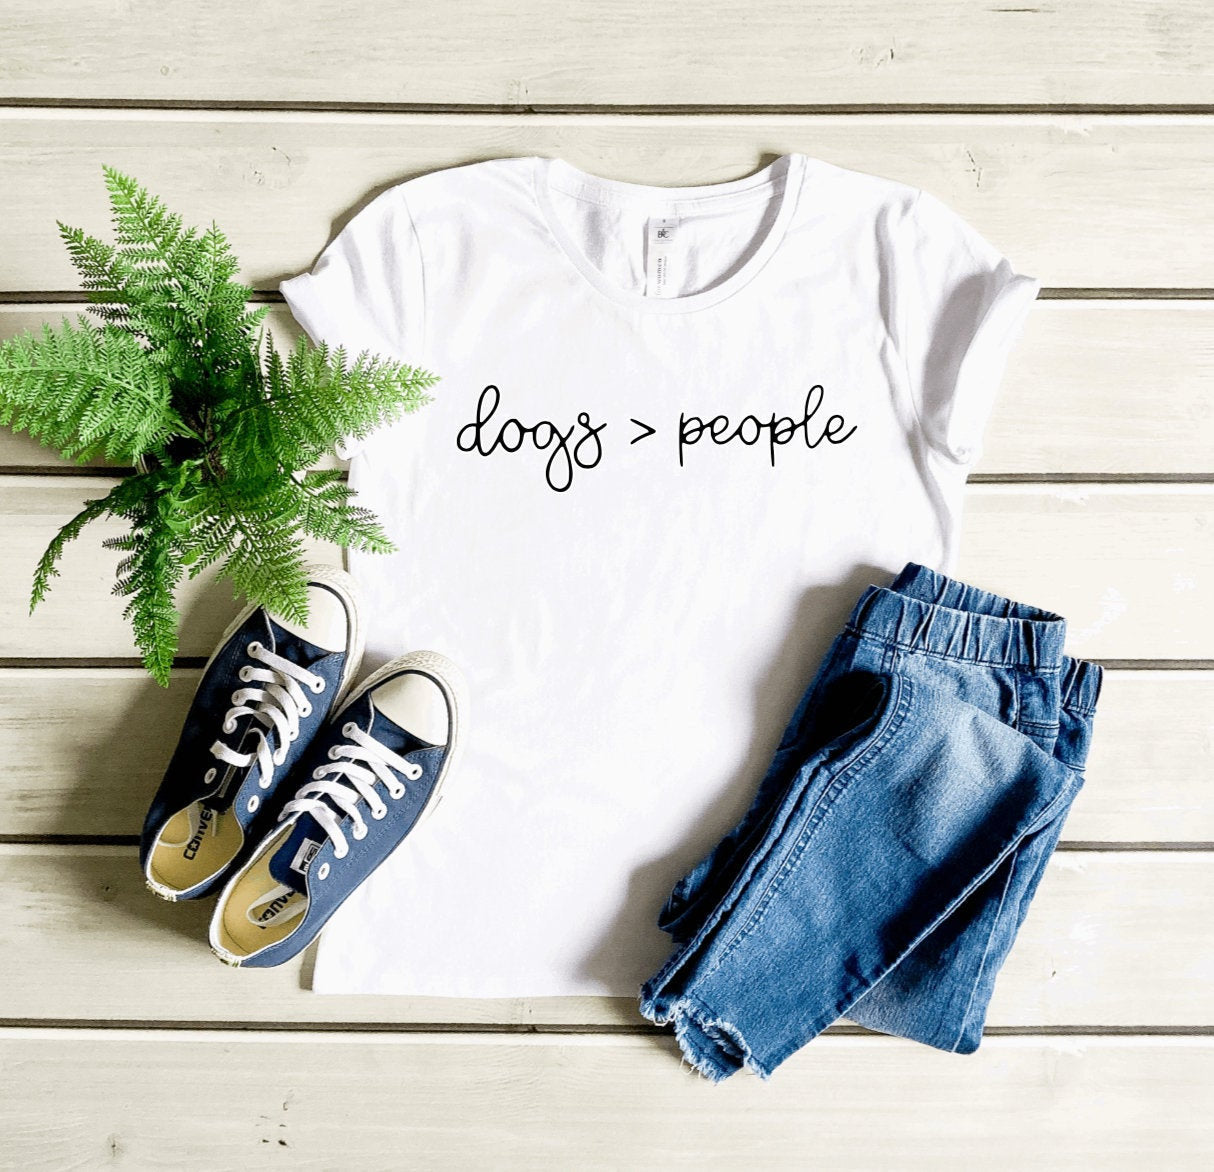 Dogs over people ladies t shirt